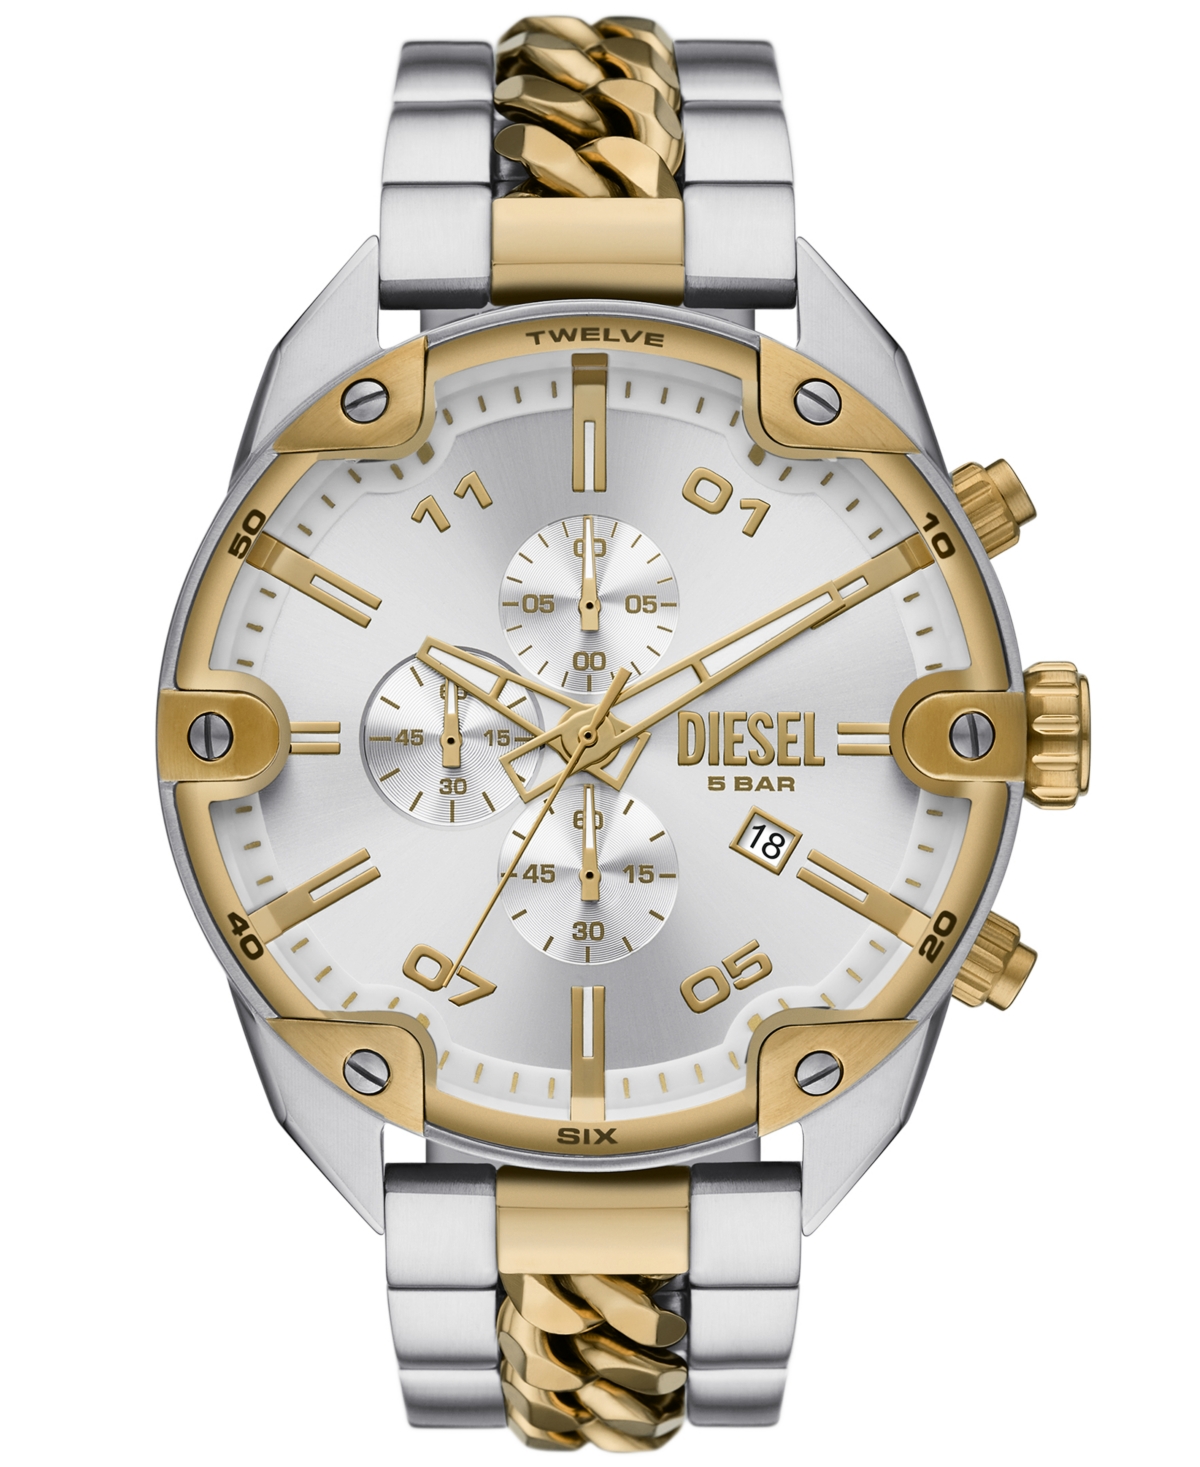 Diesel Men's Spiked Chronograph Stainless Steel Watch 49mm In Two-tone